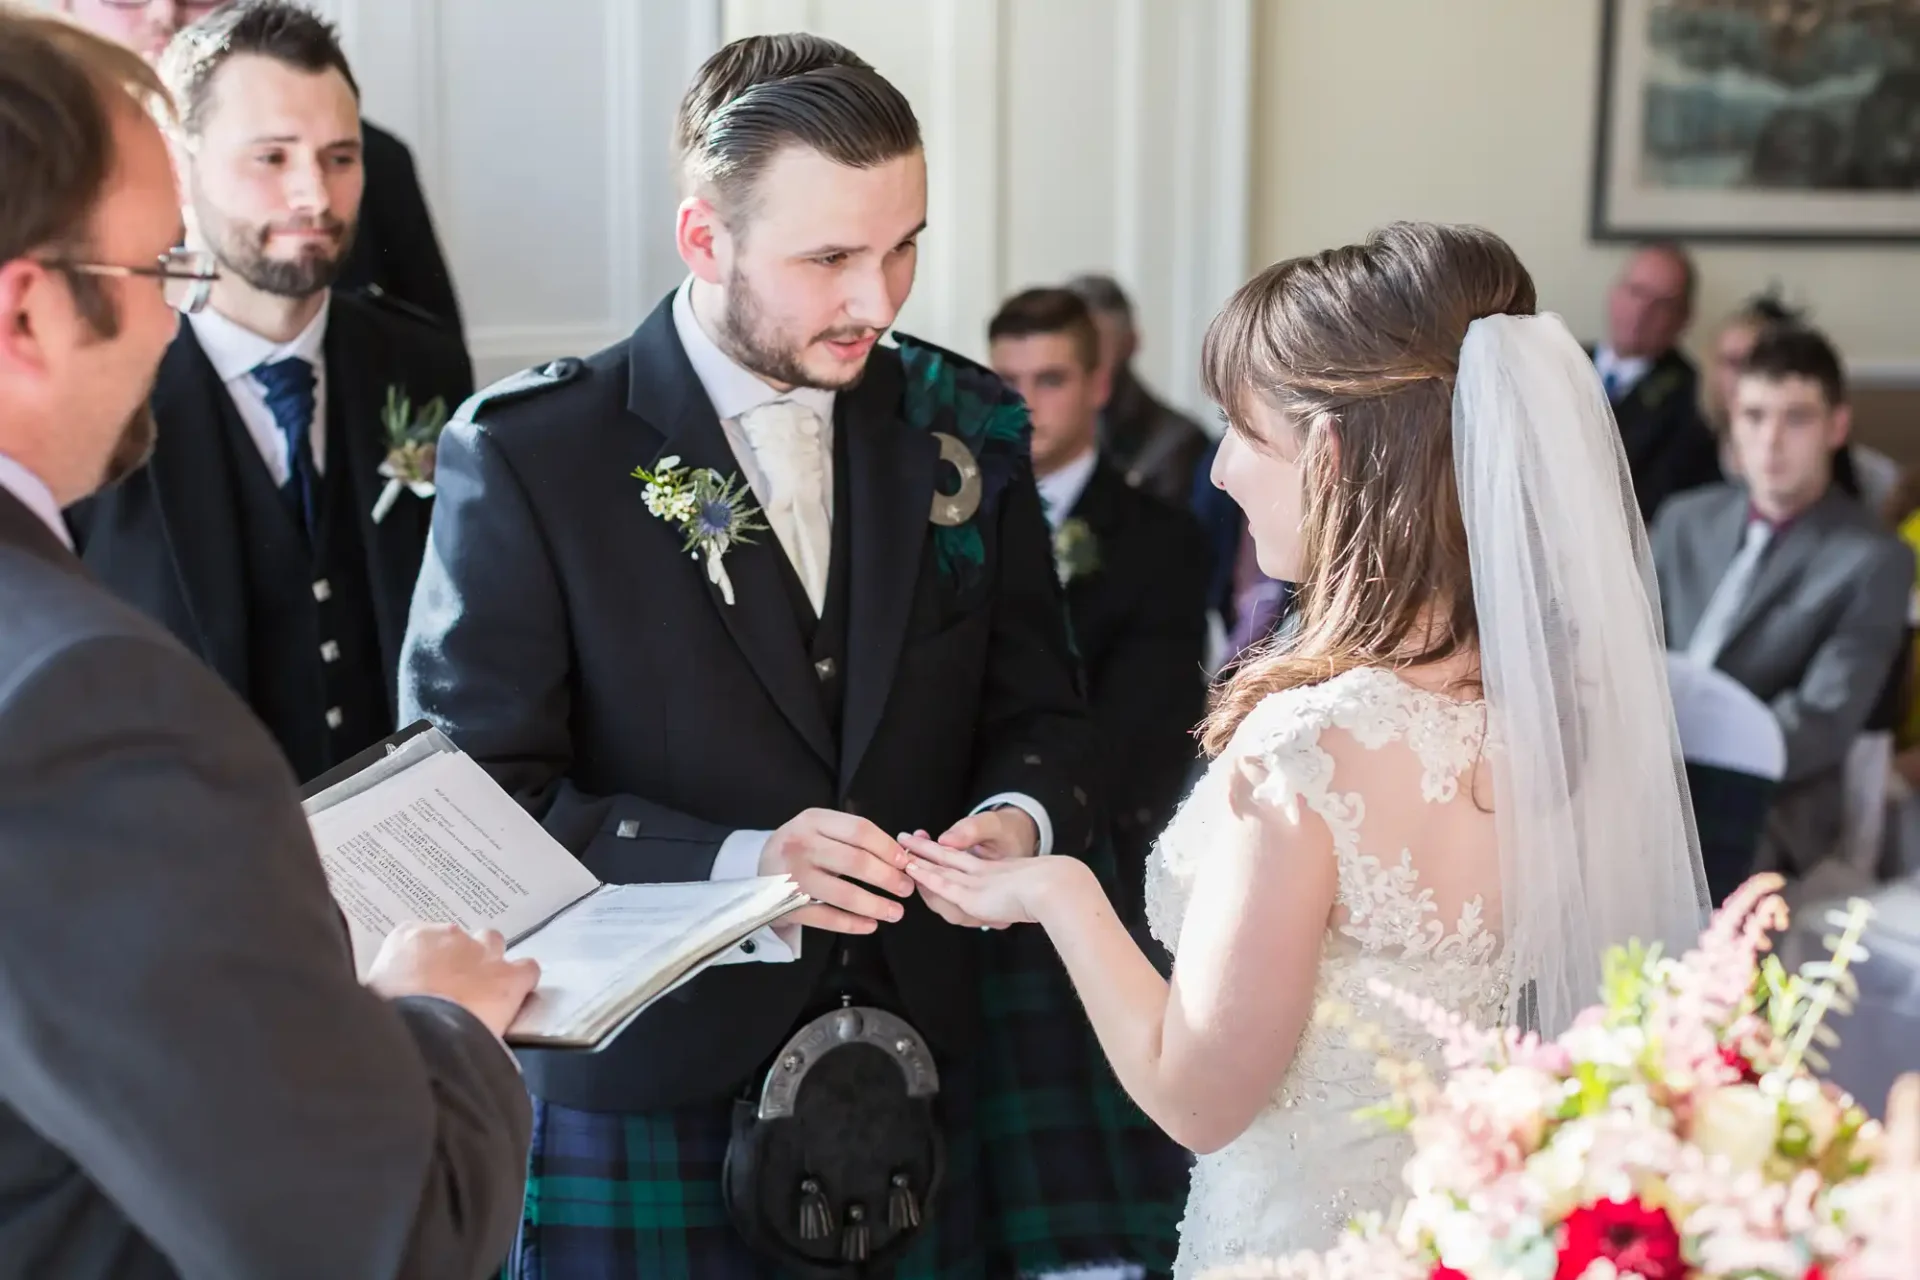 Bride and groom exchanging rings during a wedding ceremony, with the groom wearing a kilt. guests observe the moment.